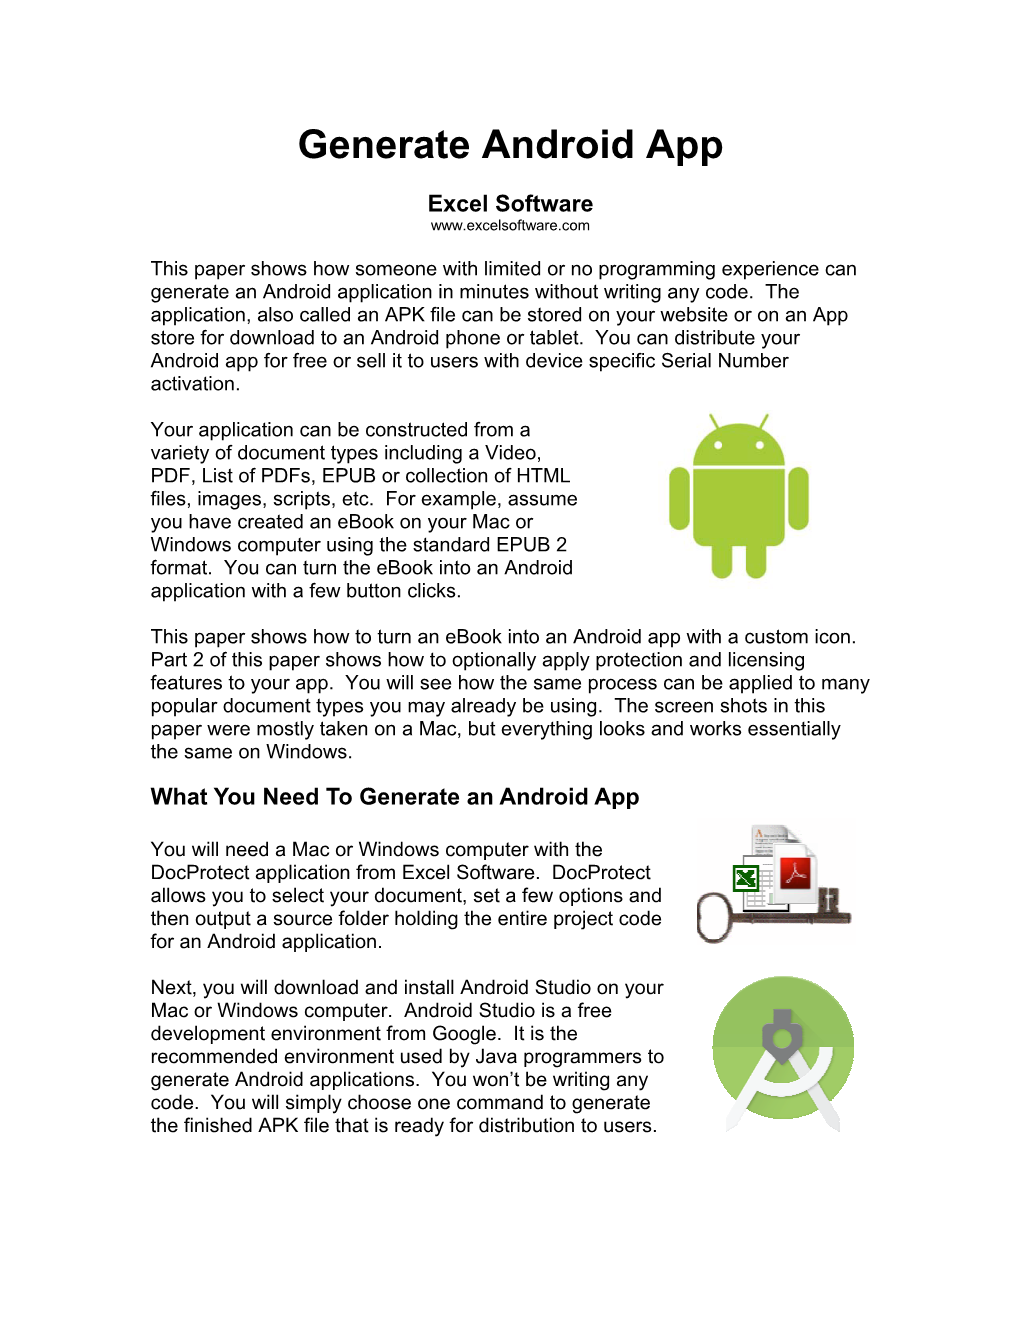 Generate Android App Part 1